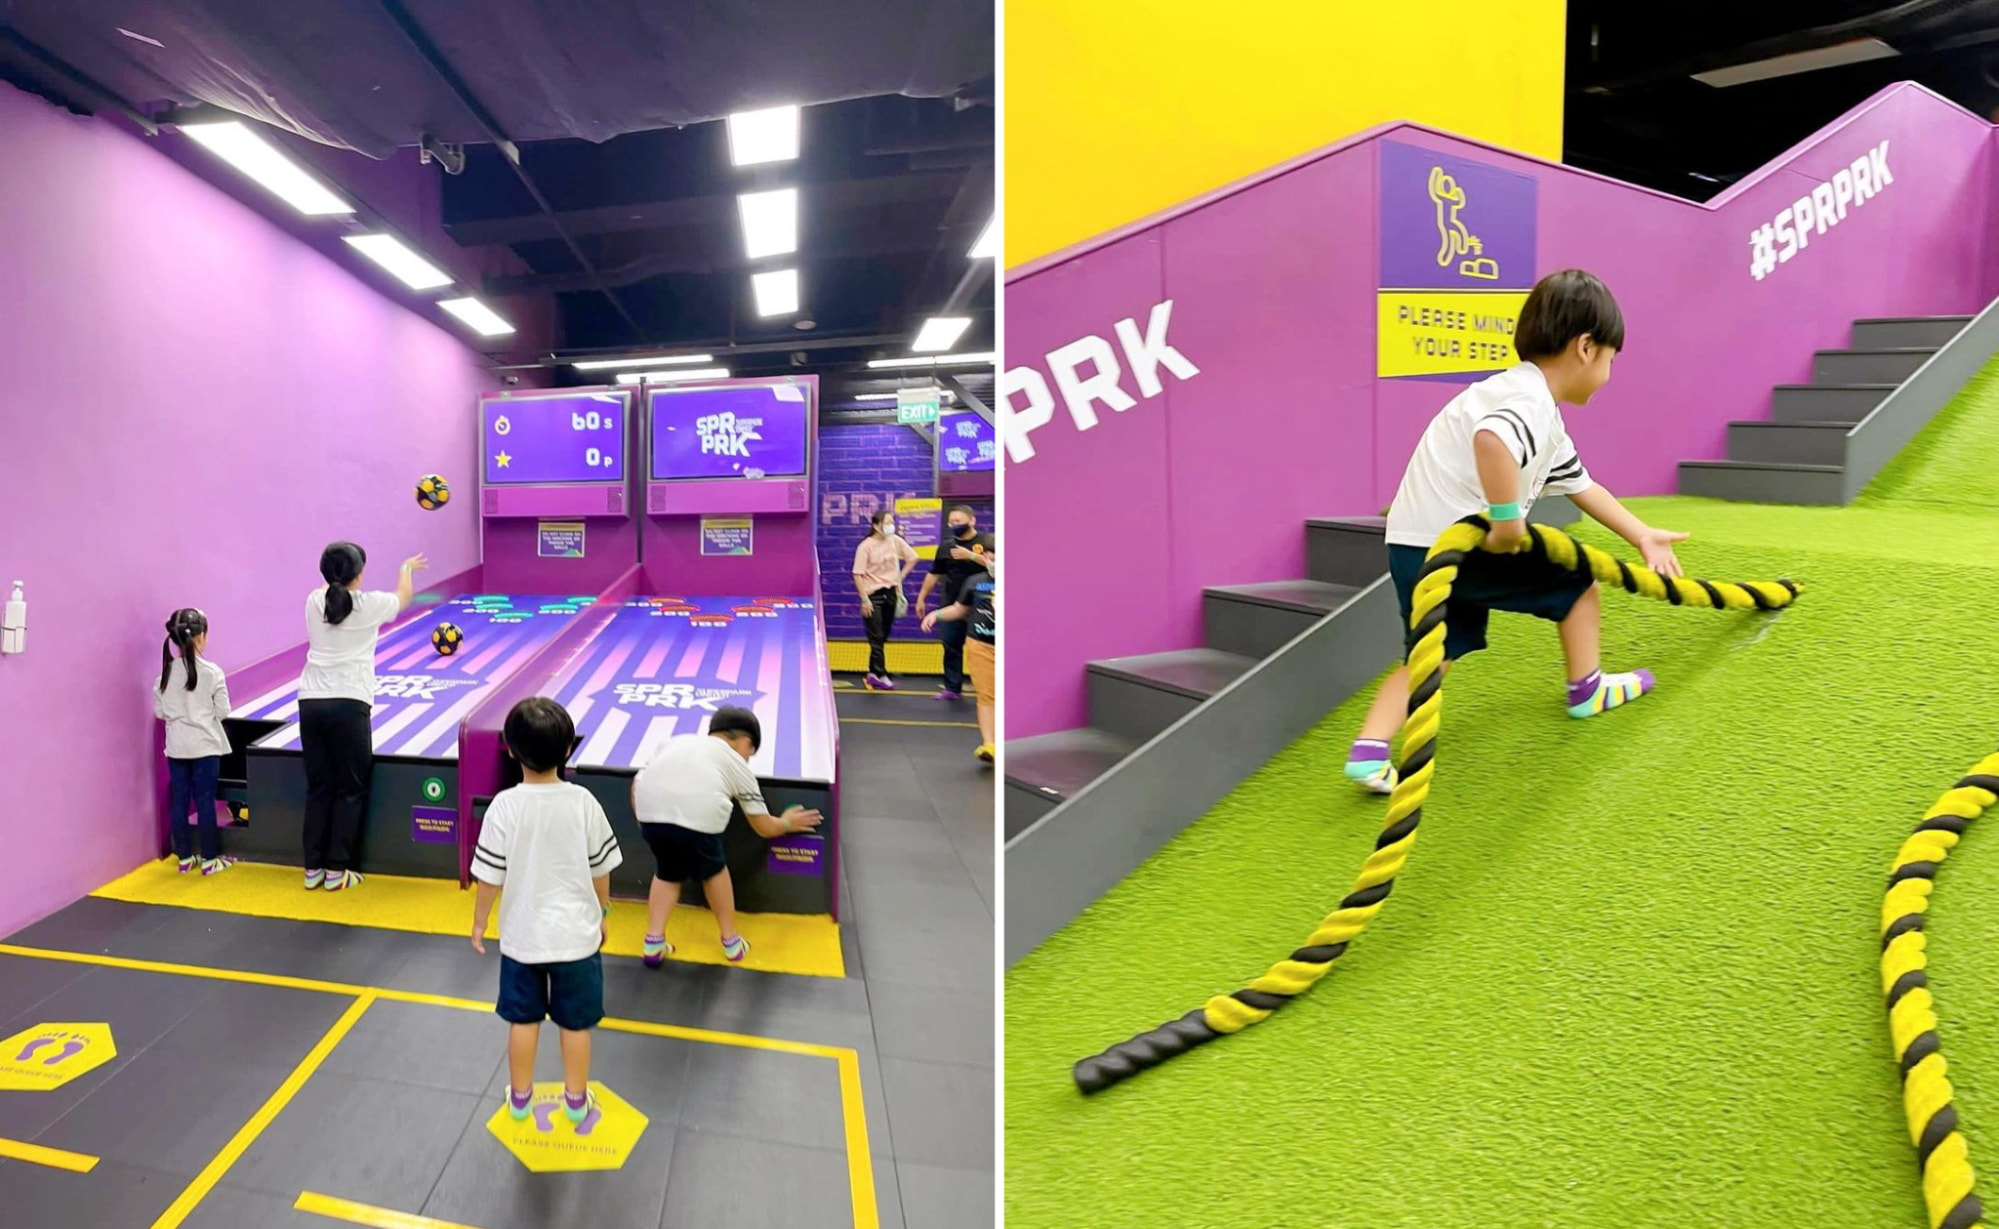 a basketball throwing game and a slope with a rope to pull oneself upward at superpark singapore